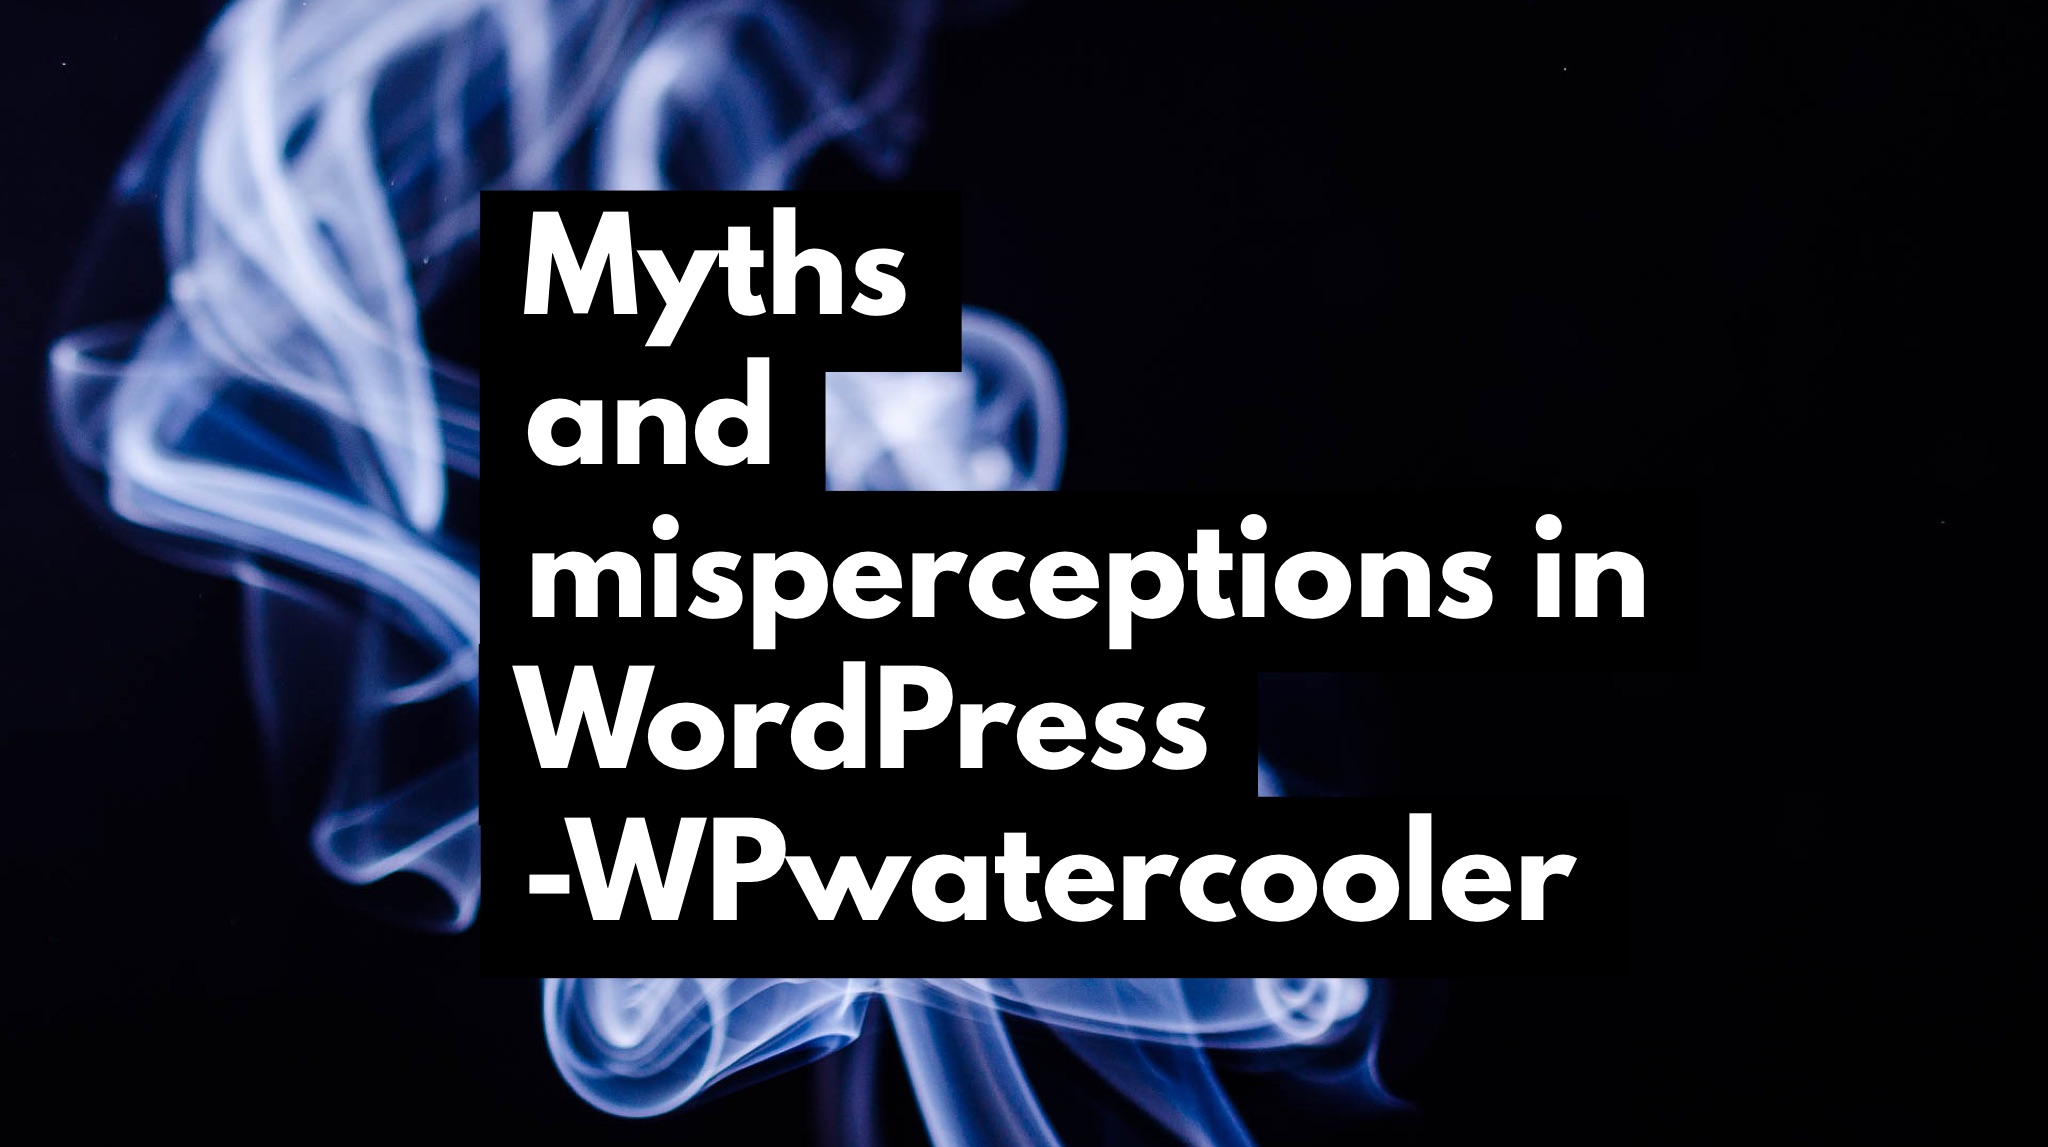 EP261 - Myths and misperceptions in WordPress